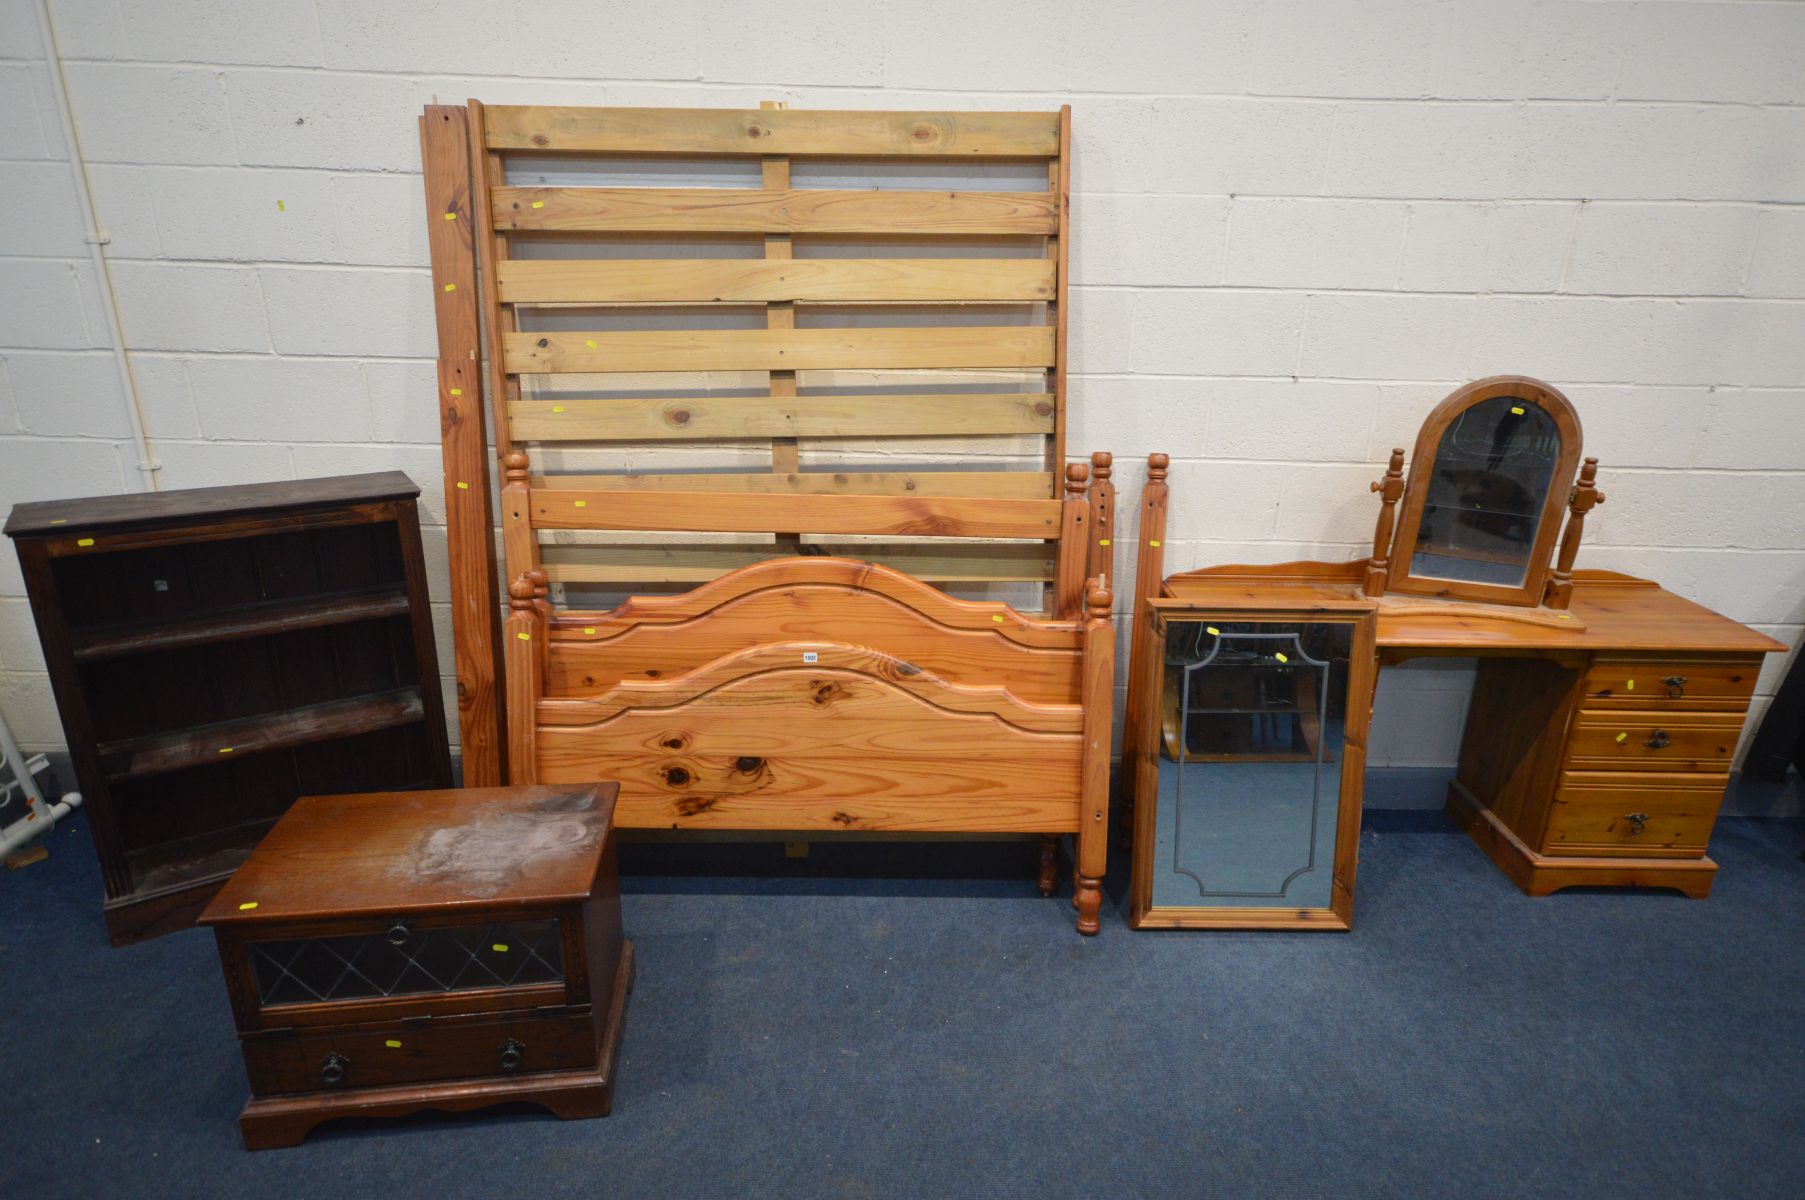 A COLLECTION OF PINE FURNITURE, comprising a 4ft four poster bed frame, dressing table with two